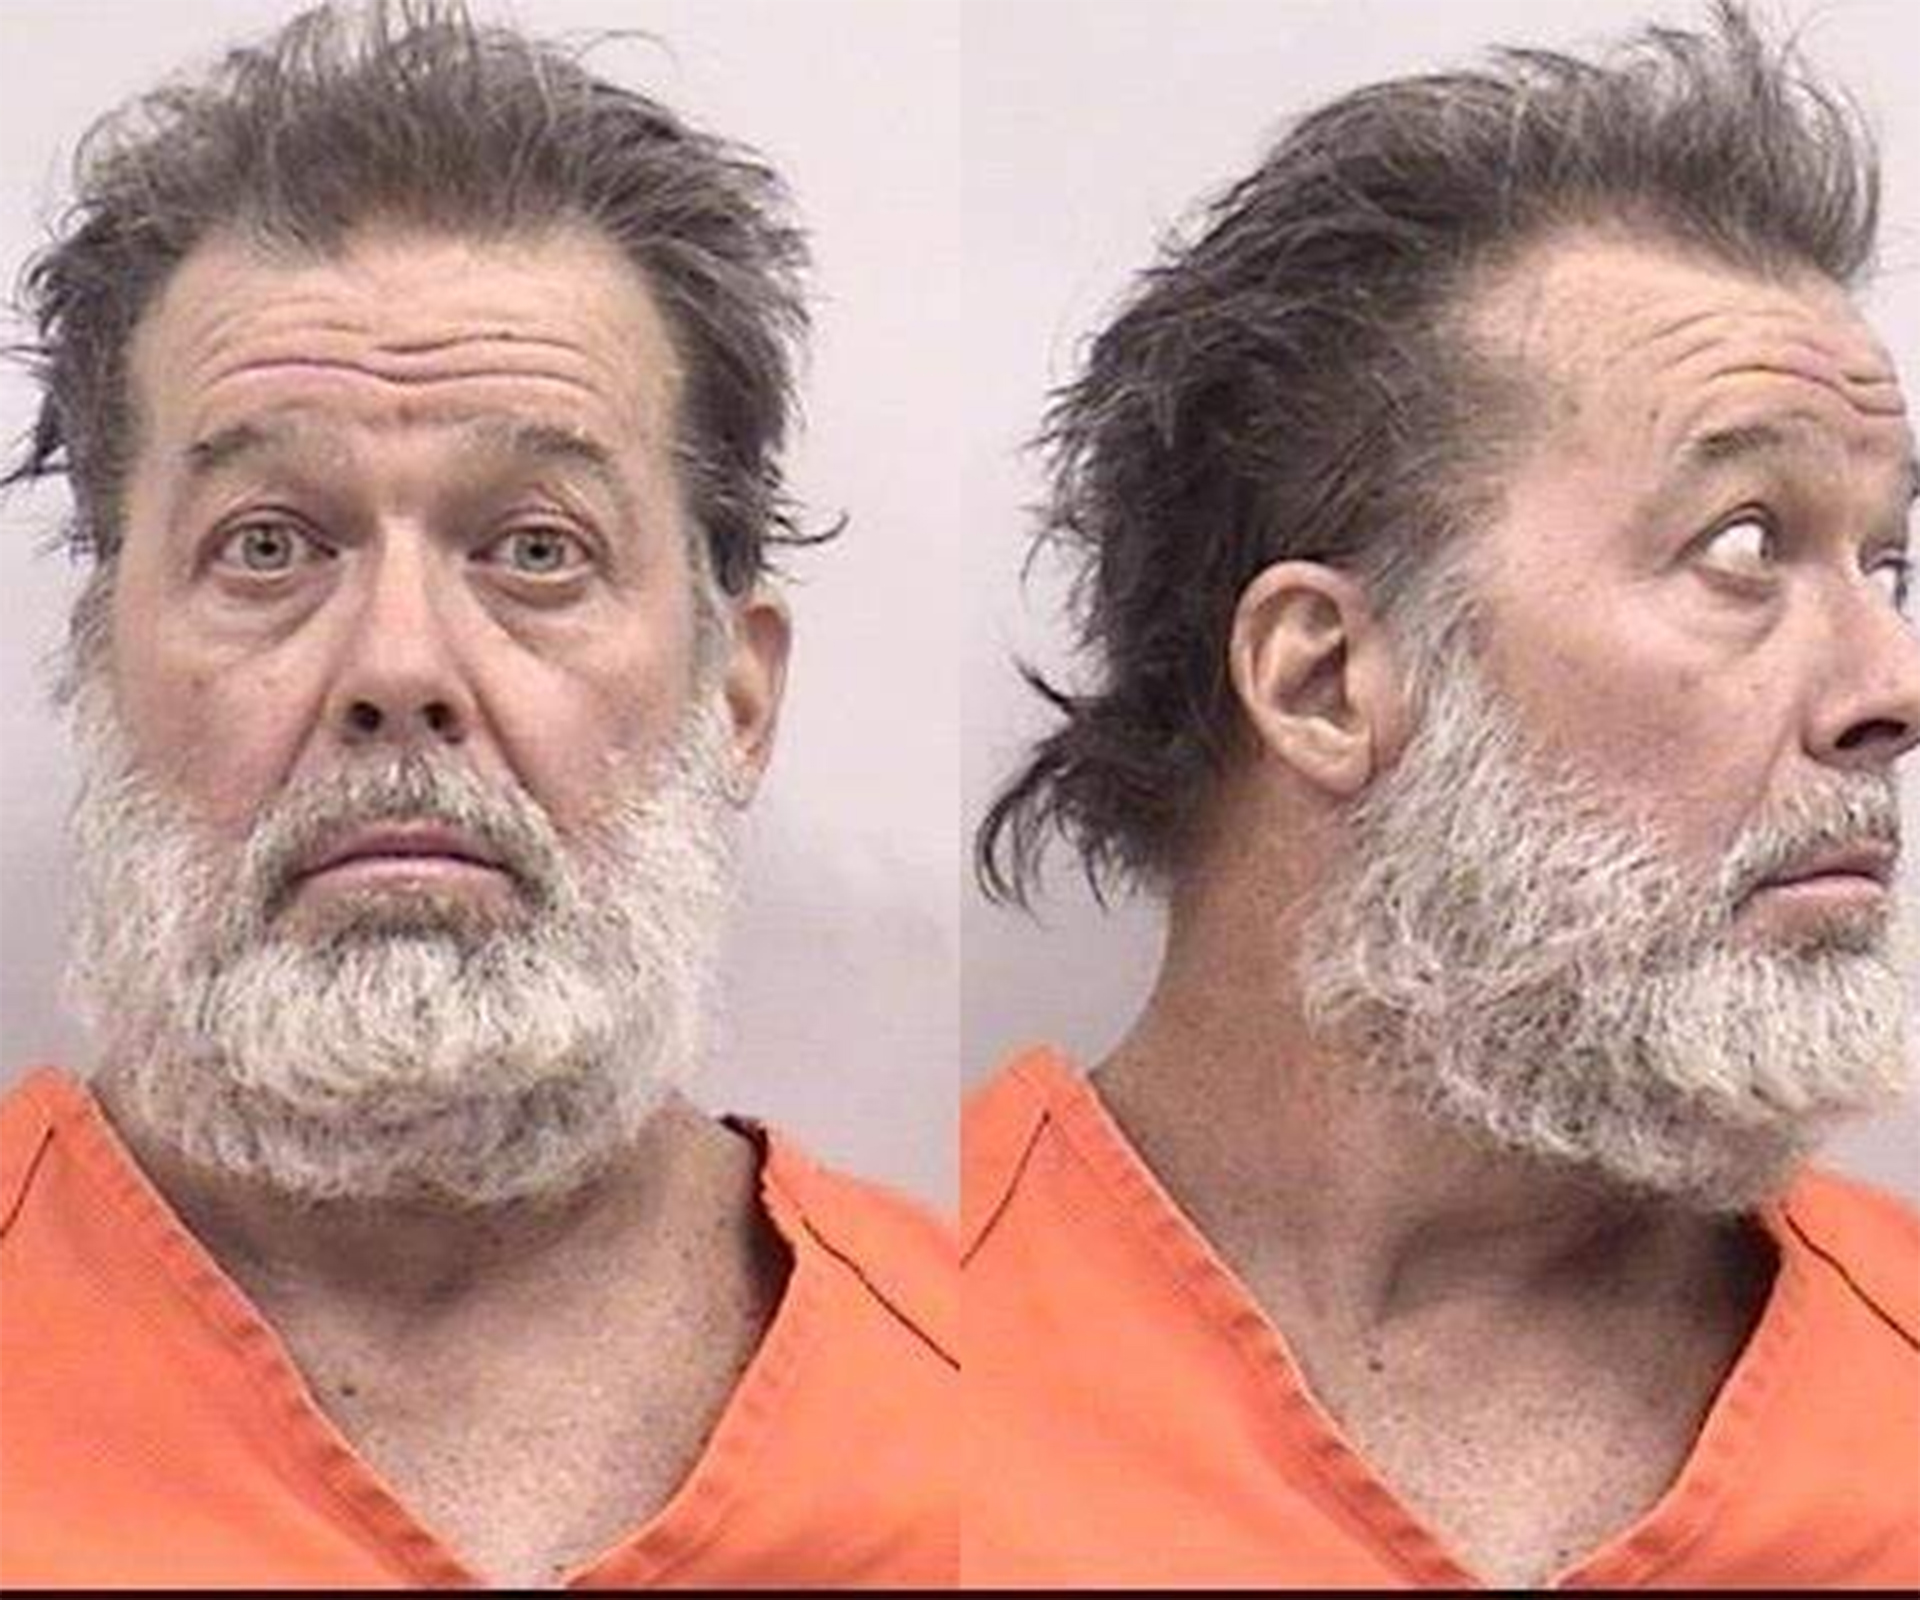 Planned Parenthood gunman was ‘angry’ about ‘baby part selling’